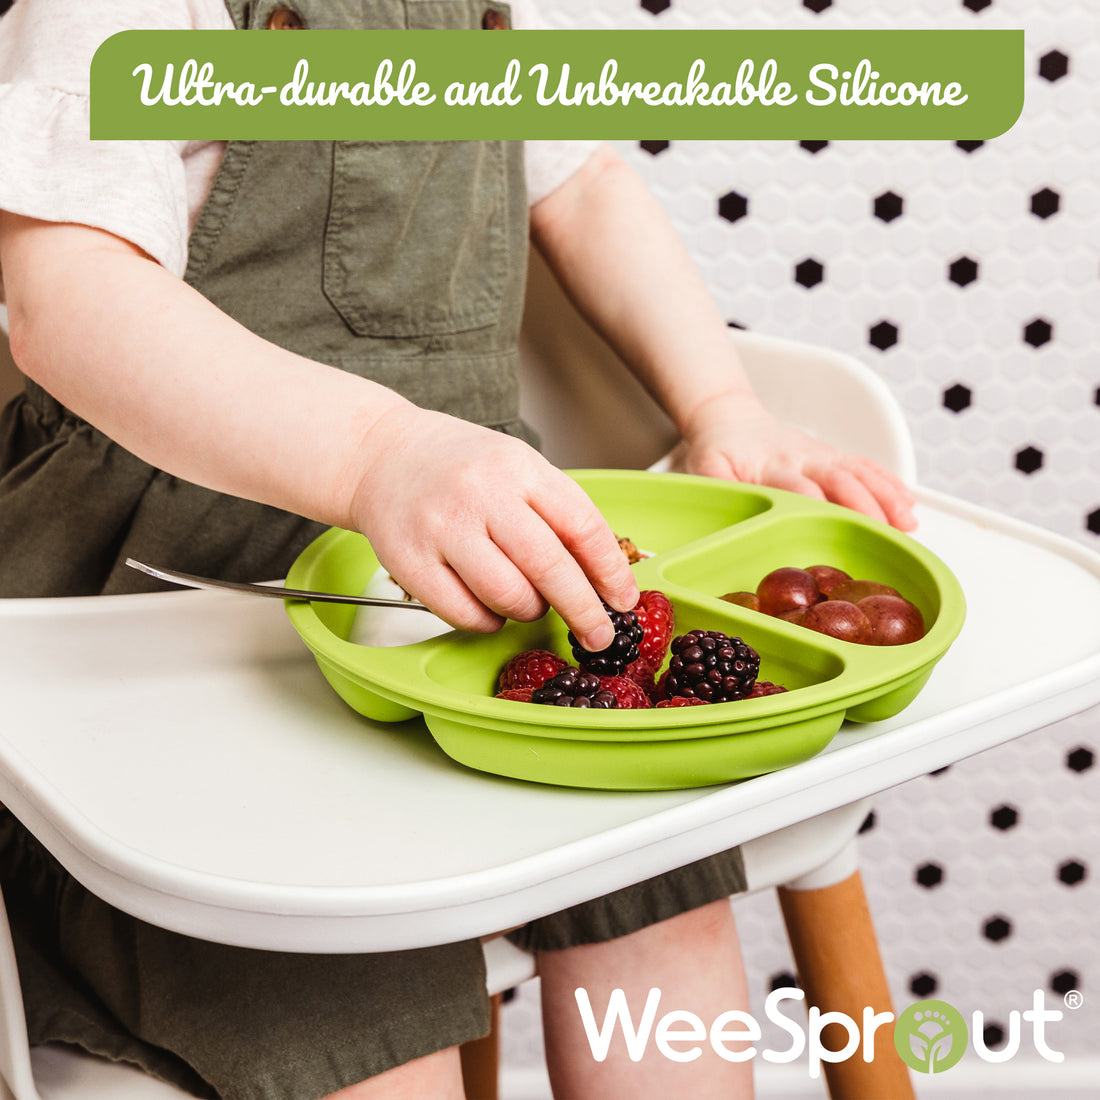 WeeSprout Suction Plates for Babies & Toddlers - 100% Silicone, Plates Stay Put with Suction Feature, Divided Design for Picky E